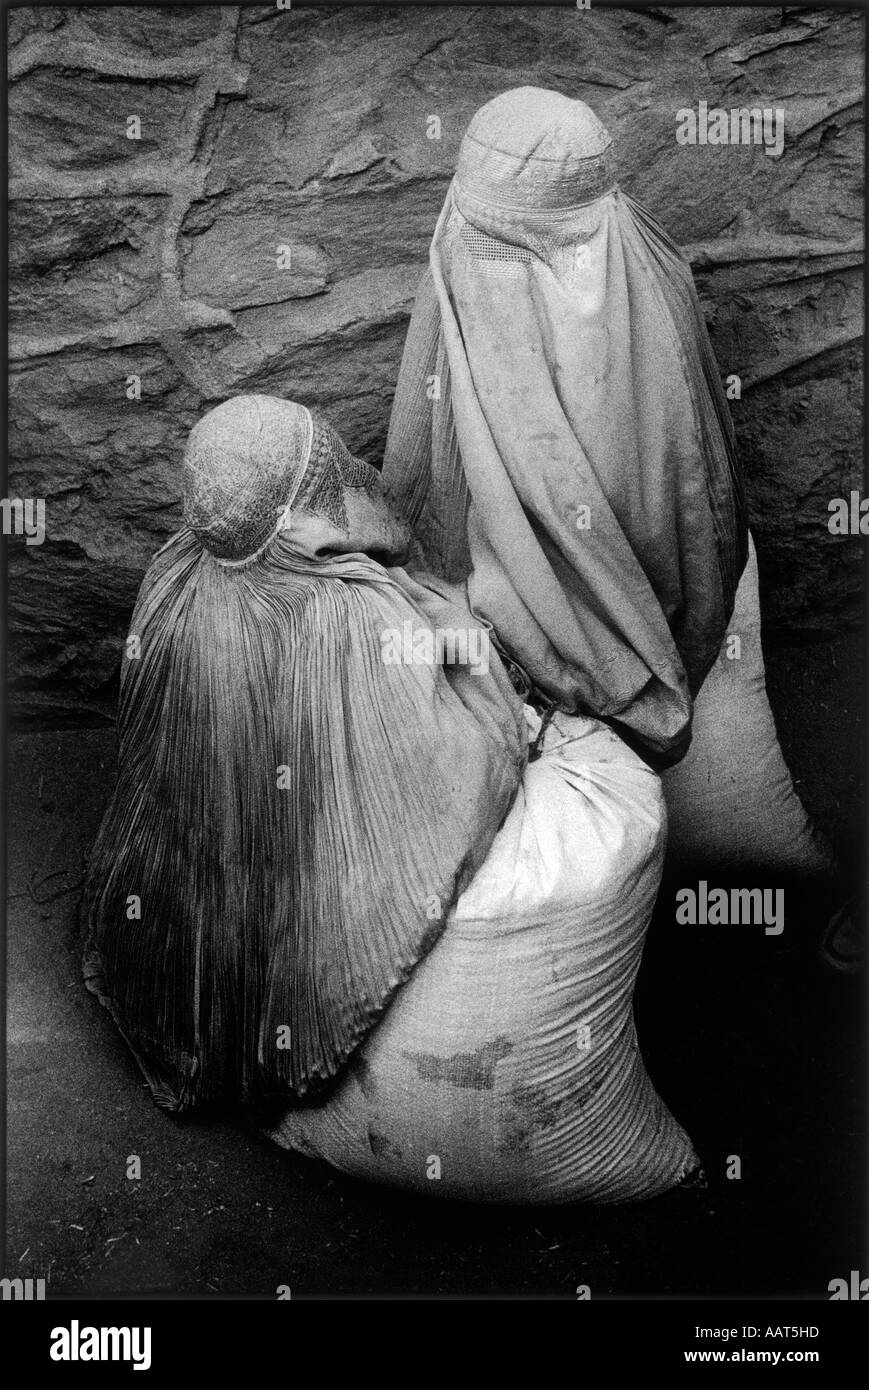 REBIRTH OF A NATION KABUL WOMEN WAITING FOR CARTS TO TAKE HOME THE SACKS OF WHEAT DONATED THROUGH W F PROGRAMME 2001 Stock Photo